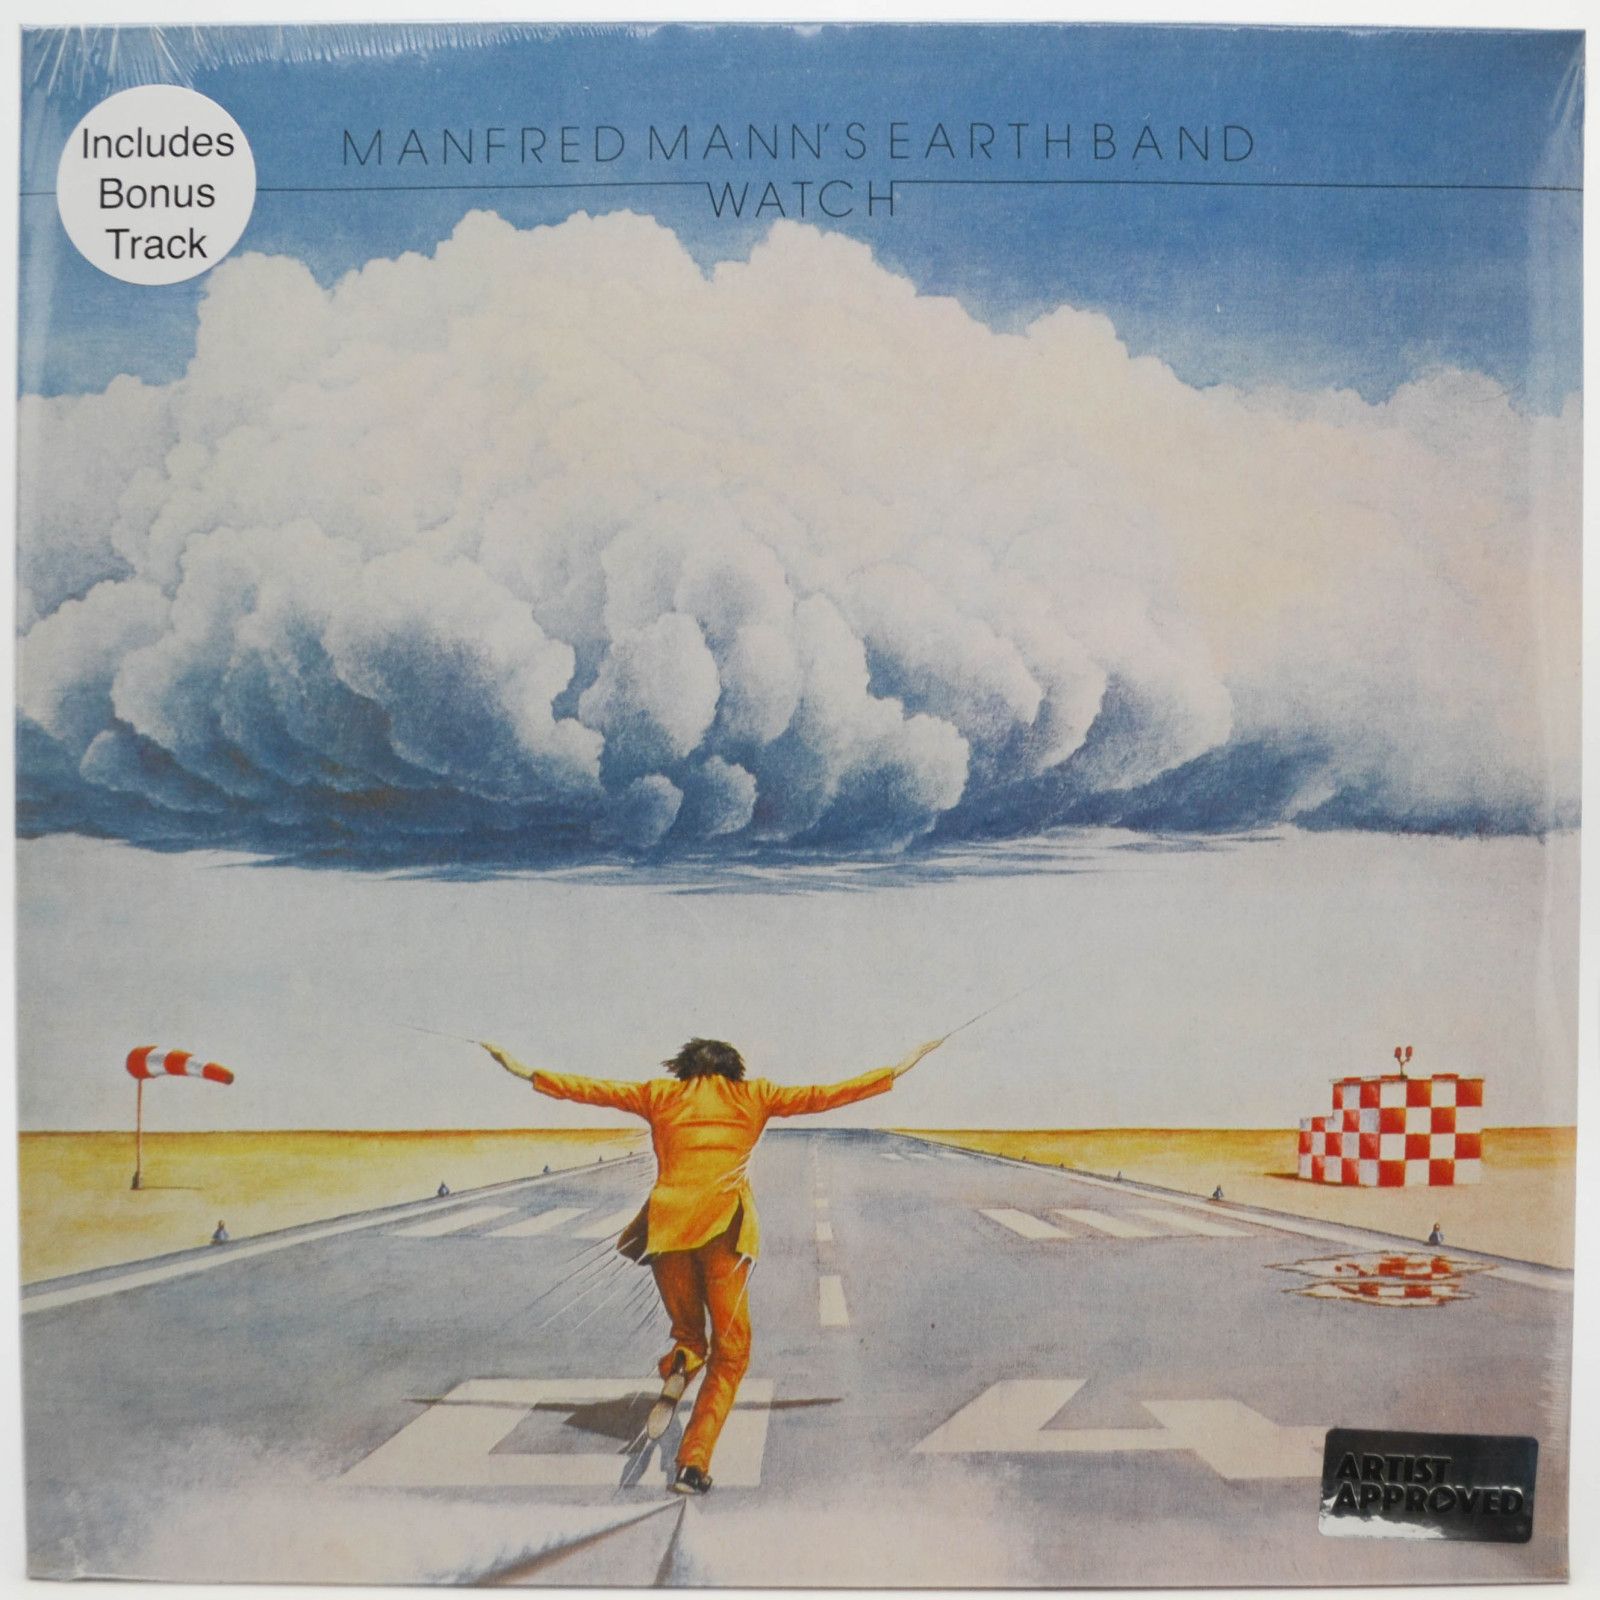 Manfred Mann's Earth Band — Watch, 1977